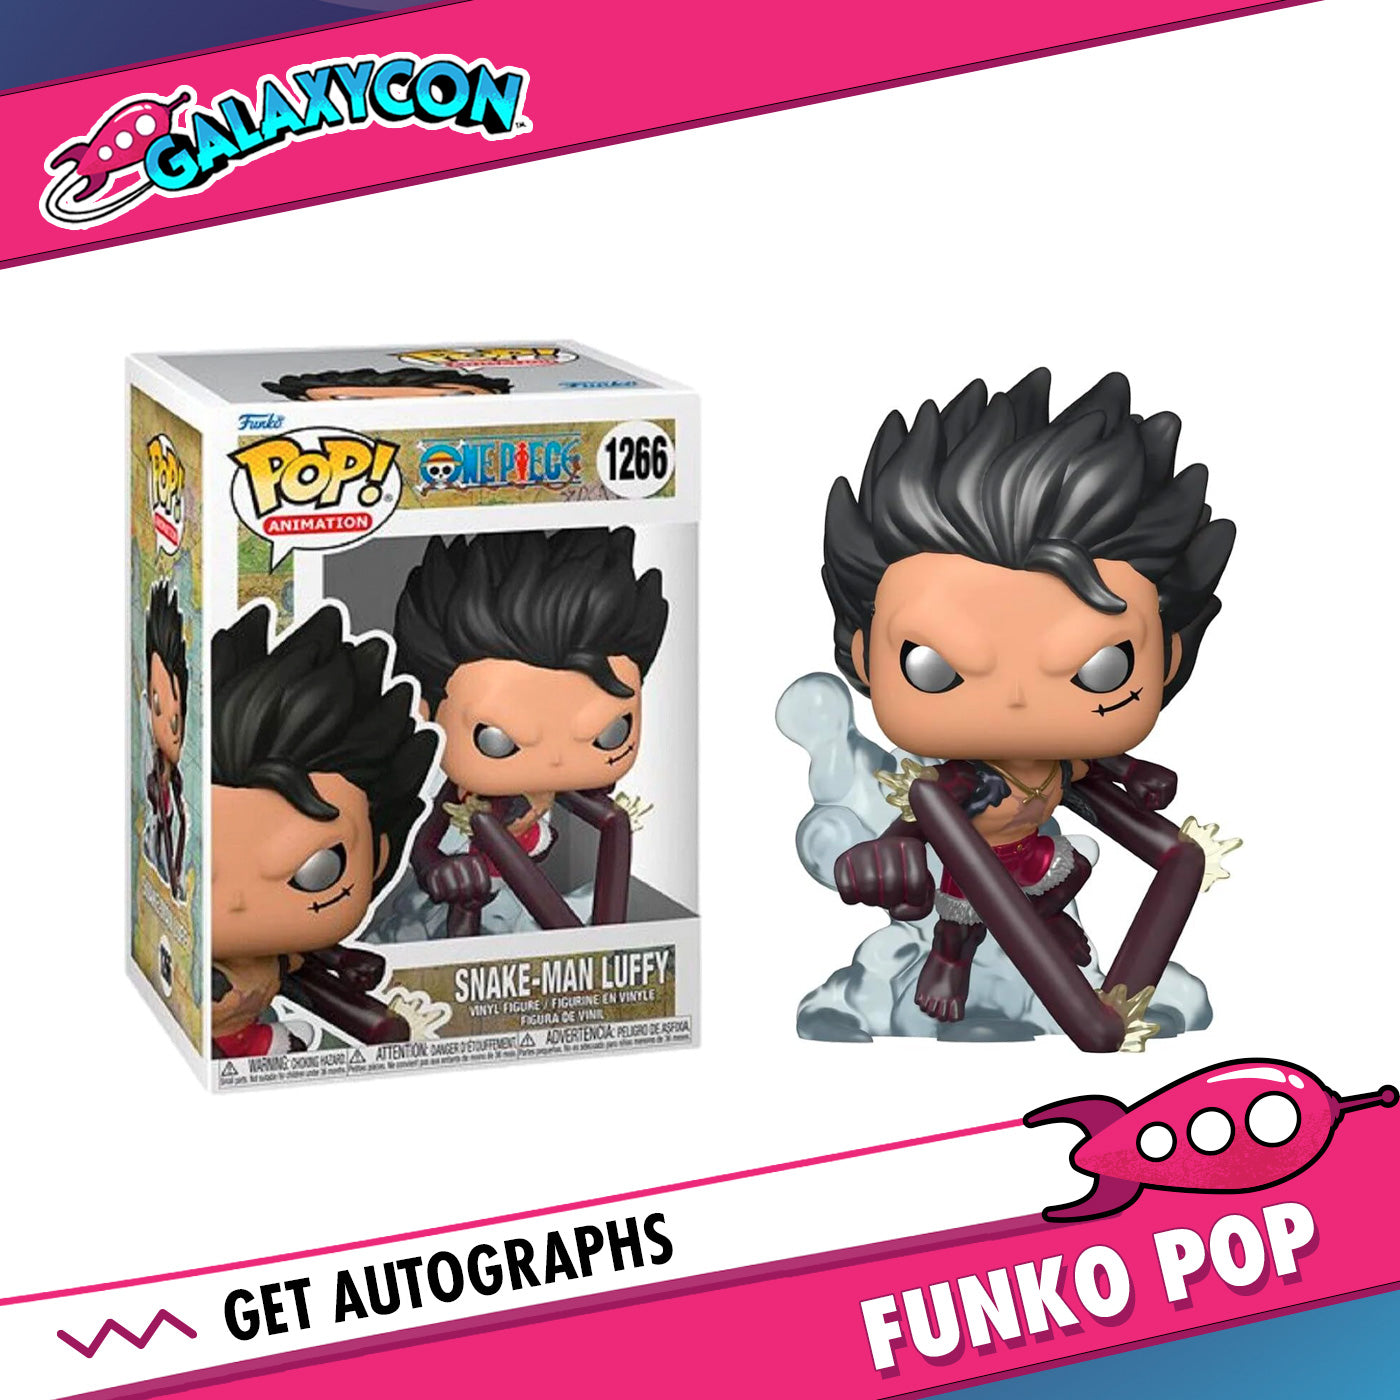 Colleen Clinkenbeard: Autograph Signing on a Funko Pop, July 28th